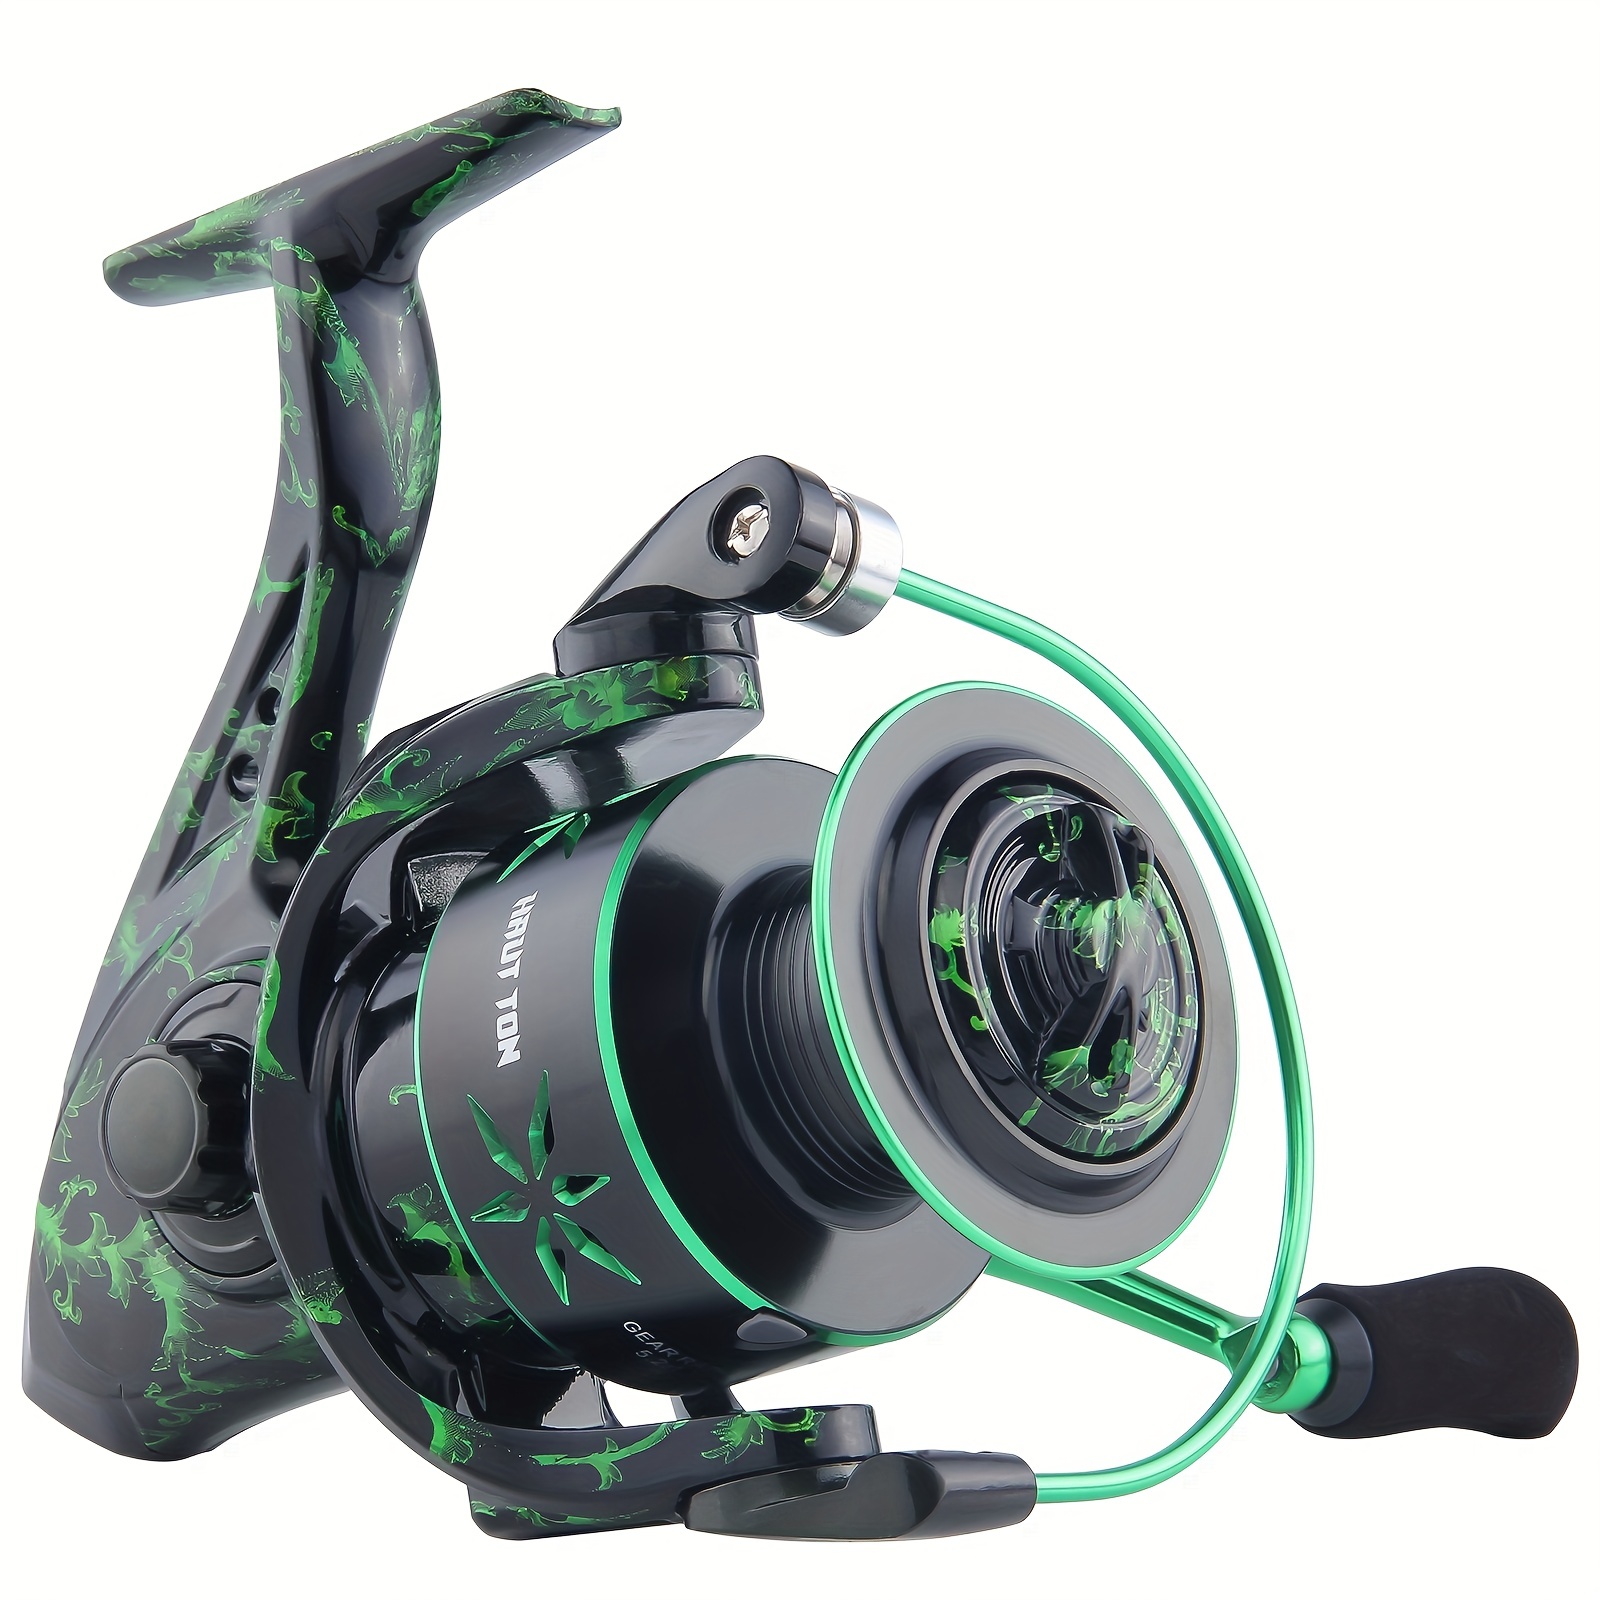 HAUT TON Spinning Reel 12000 Series Advanced Version,17+1BB Graphite Frame  Surf Fishing Reels,4.8:1 Gear Ratio 55lbs Max Drag Medium/Heavy Long  Casting Inshore & Offshore Saltwater Monster Fish.…, Spinning Reels -   Canada